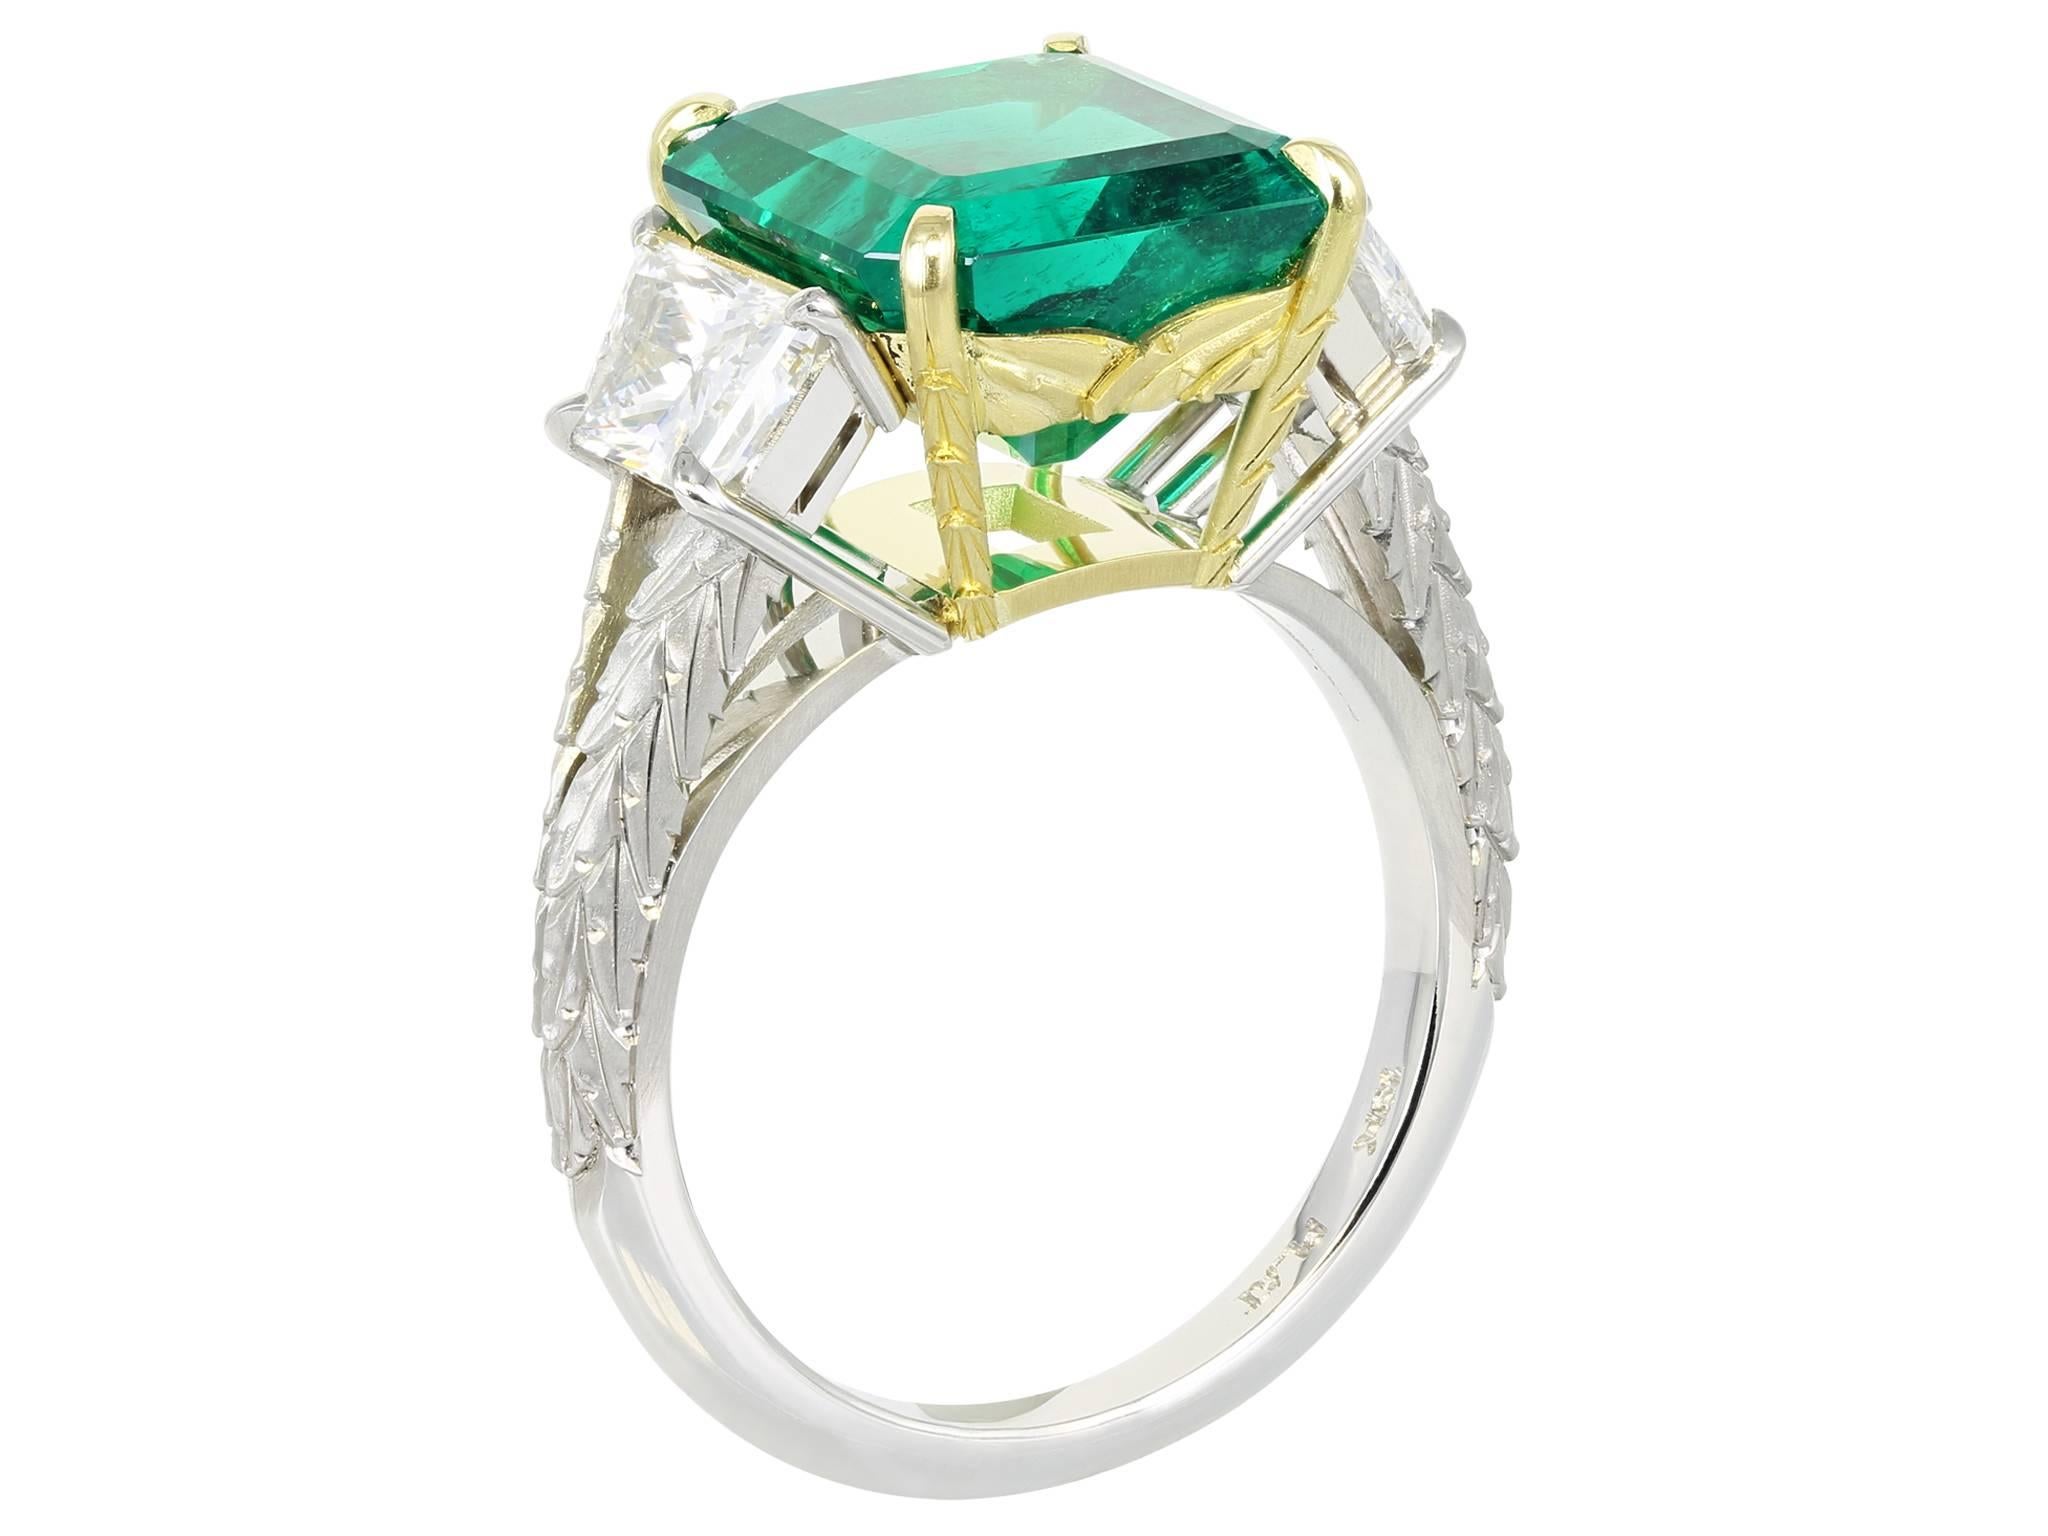 Platinum and 18 karat yellow gold custom made 3 stone ring consisting of 1 square emerald cut Colombian emerald weighing 5.00 carats, measuring 10.94 x 10.03 x 6.49mm the center stone is flanked by 2 brilliant cut trapezoid diamonds having a total